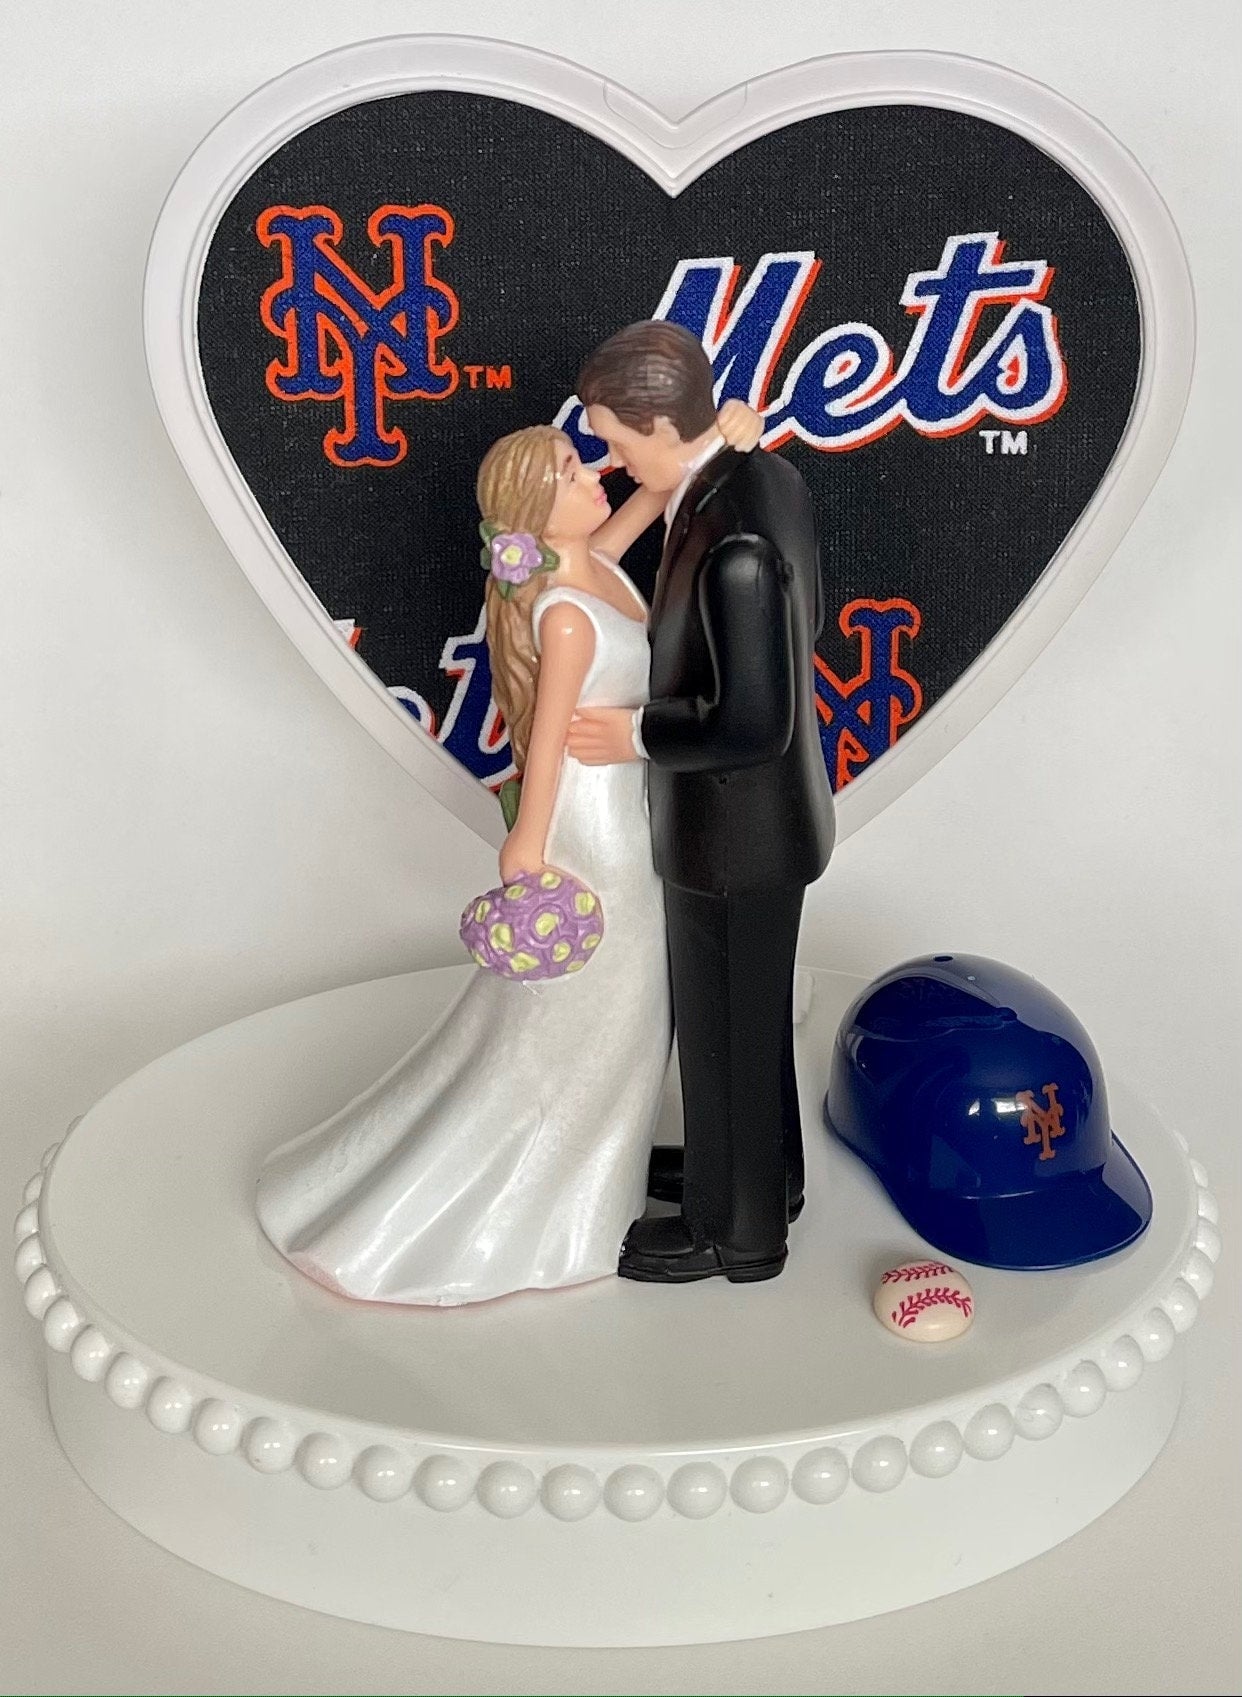 Wedding Cake Topper New York Mets Baseball Themed Beautiful Long-Haired Bride and Groom Fun Groom's Cake Top Shower Gift Idea Reception